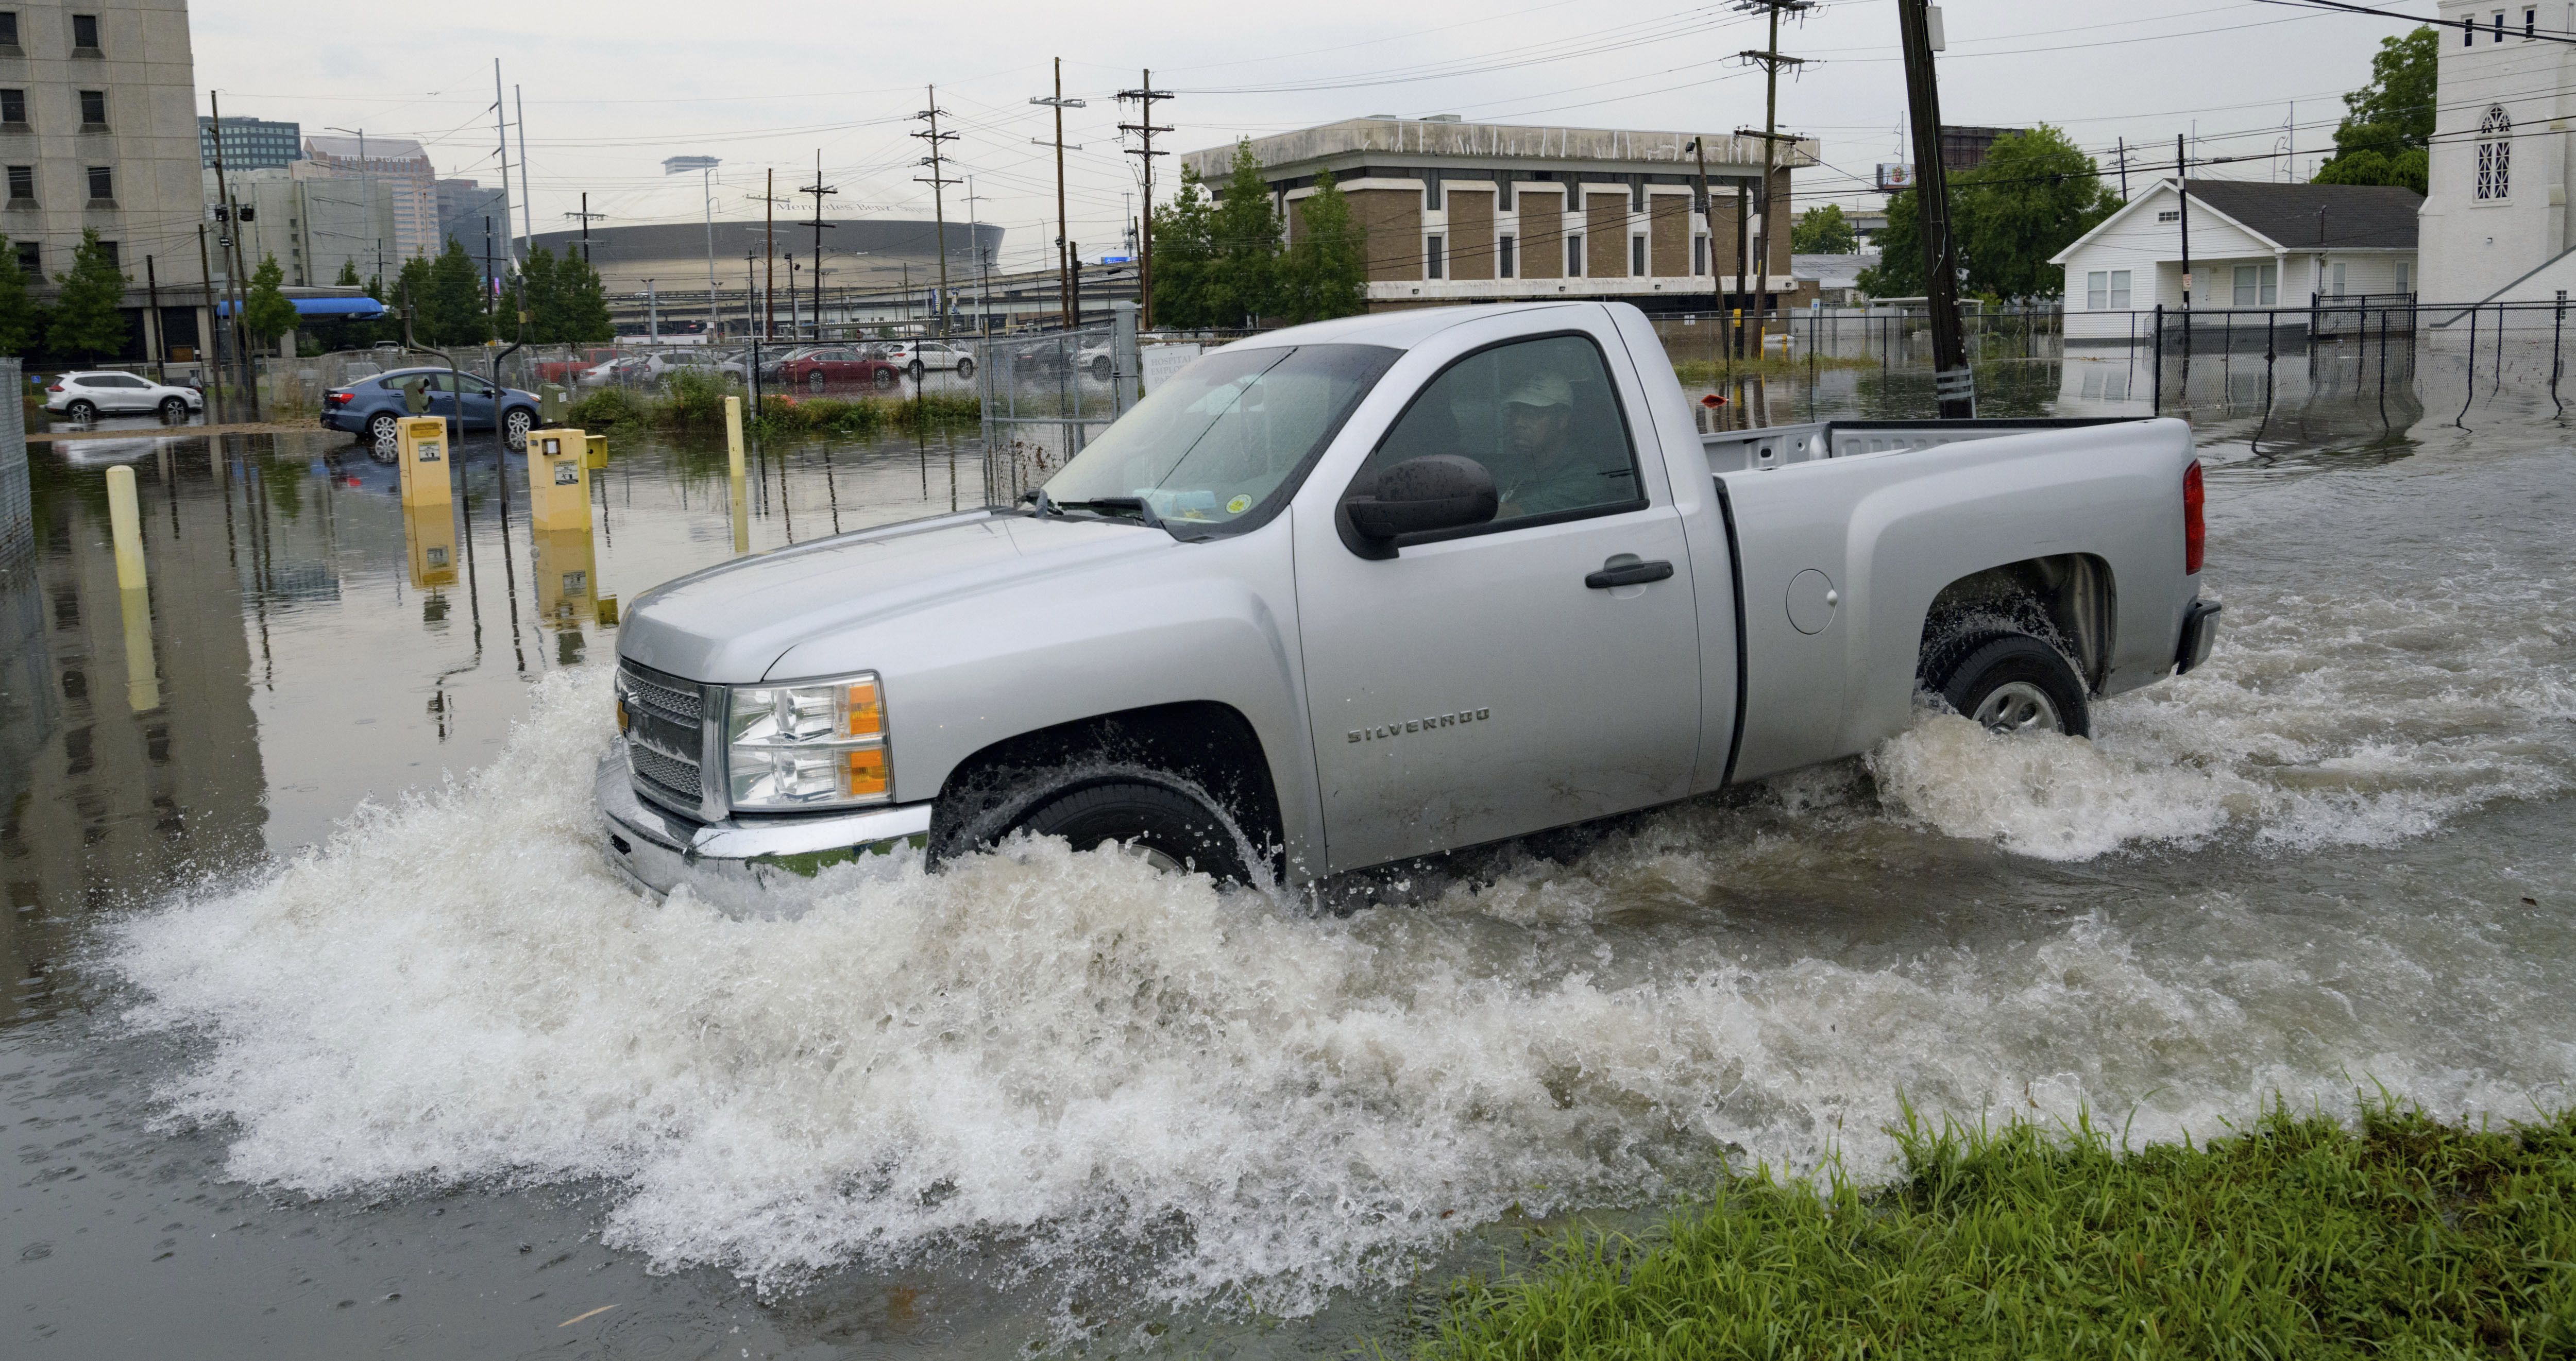 New Orleans' levees face a hard test as storm bears down